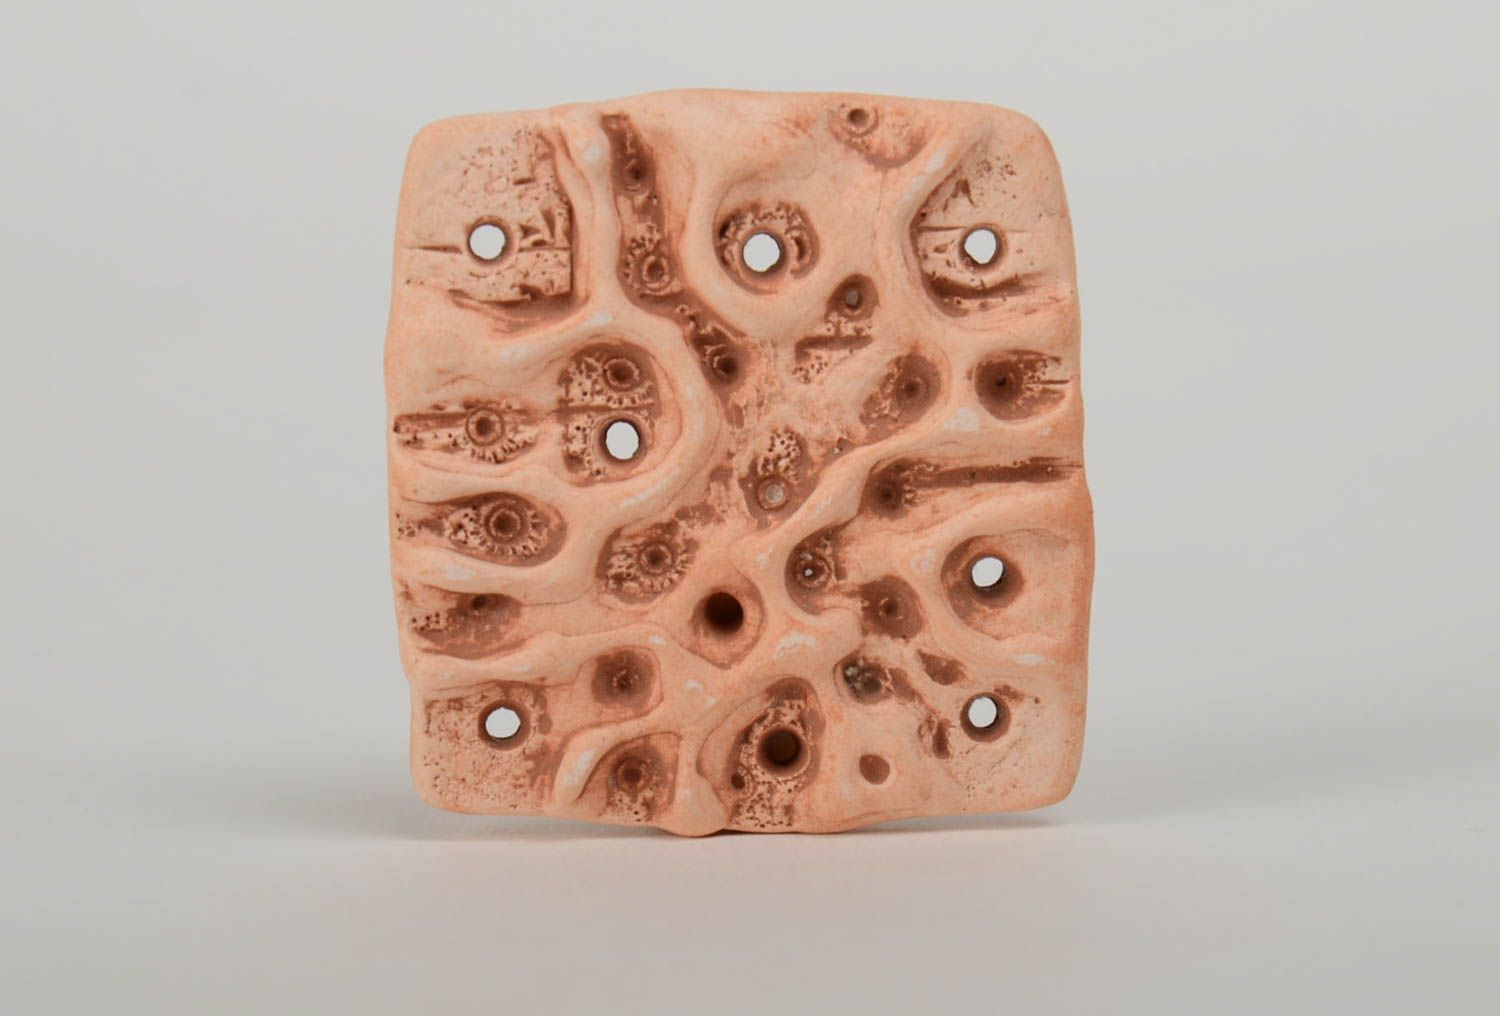 Handmade ceramic pendant of square shape molded of pottery clay with perforation photo 2